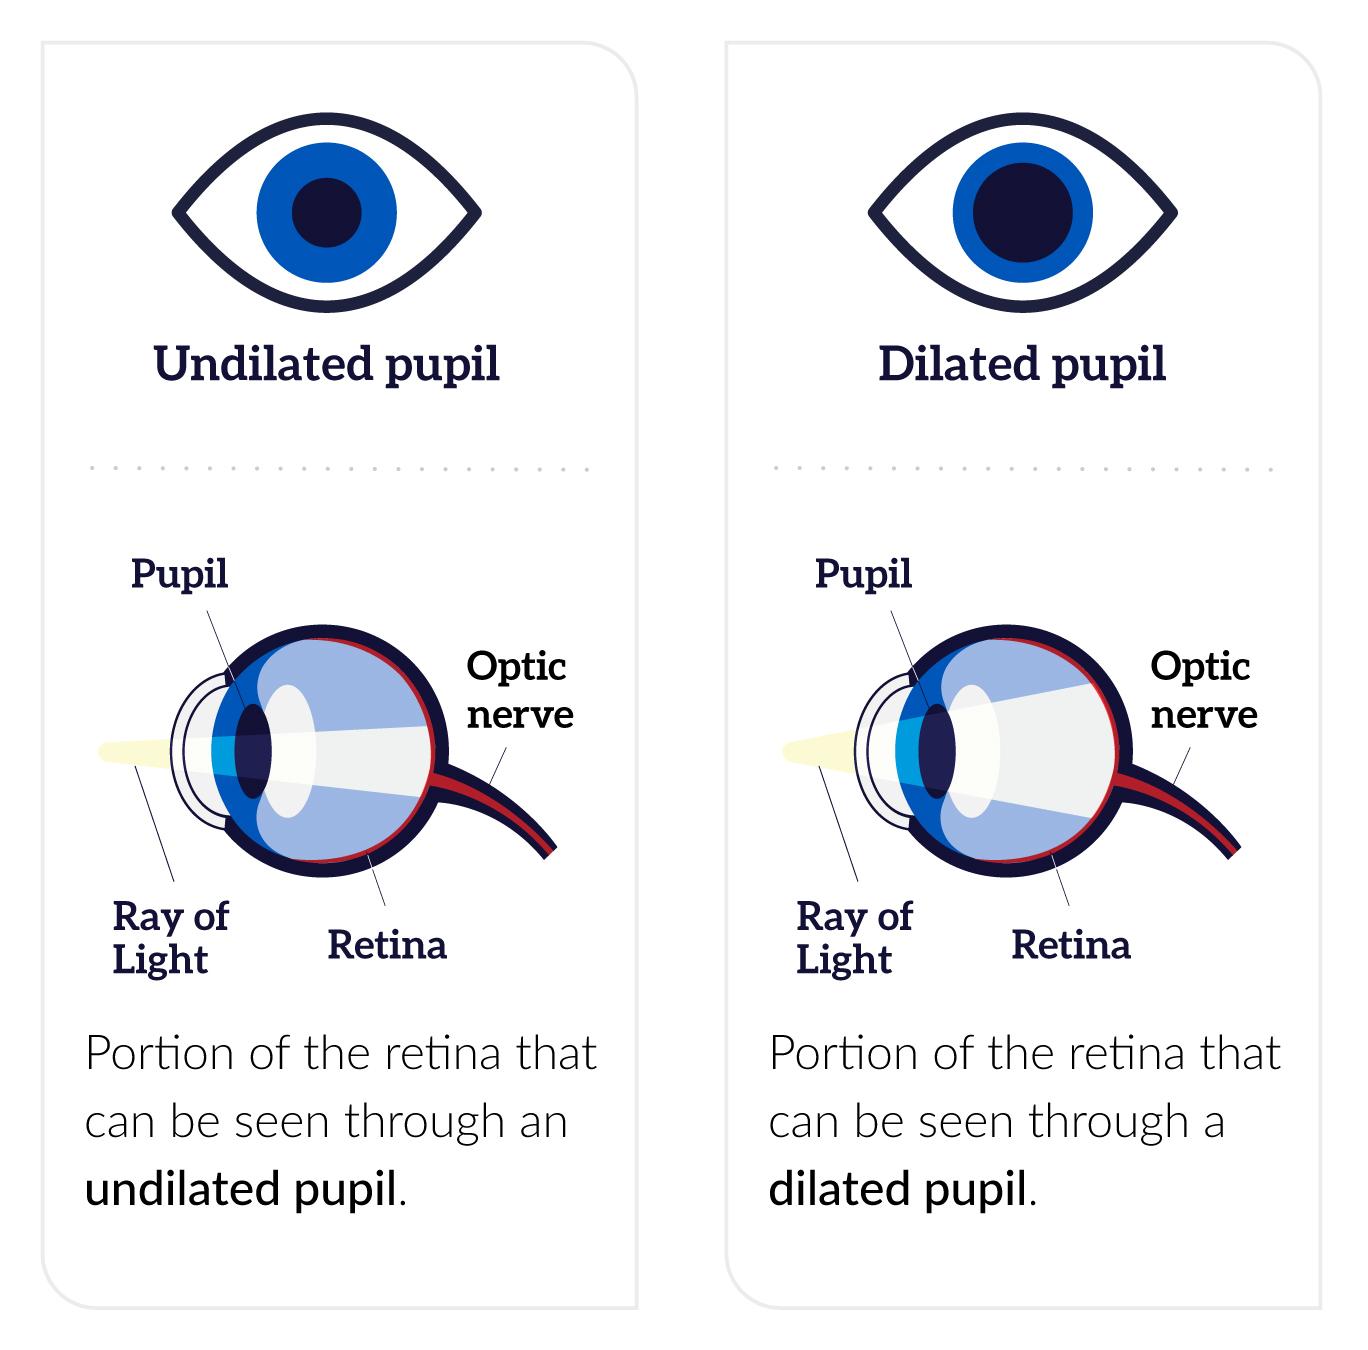 An undilated pupil and a dilated pupil. A narrow ray of light enters the eye through the undilated pupil and shines on a small part of the retina at the back of the eye. A wider ray of light enters through the dilated pupil and shines on a larger part of the retina.